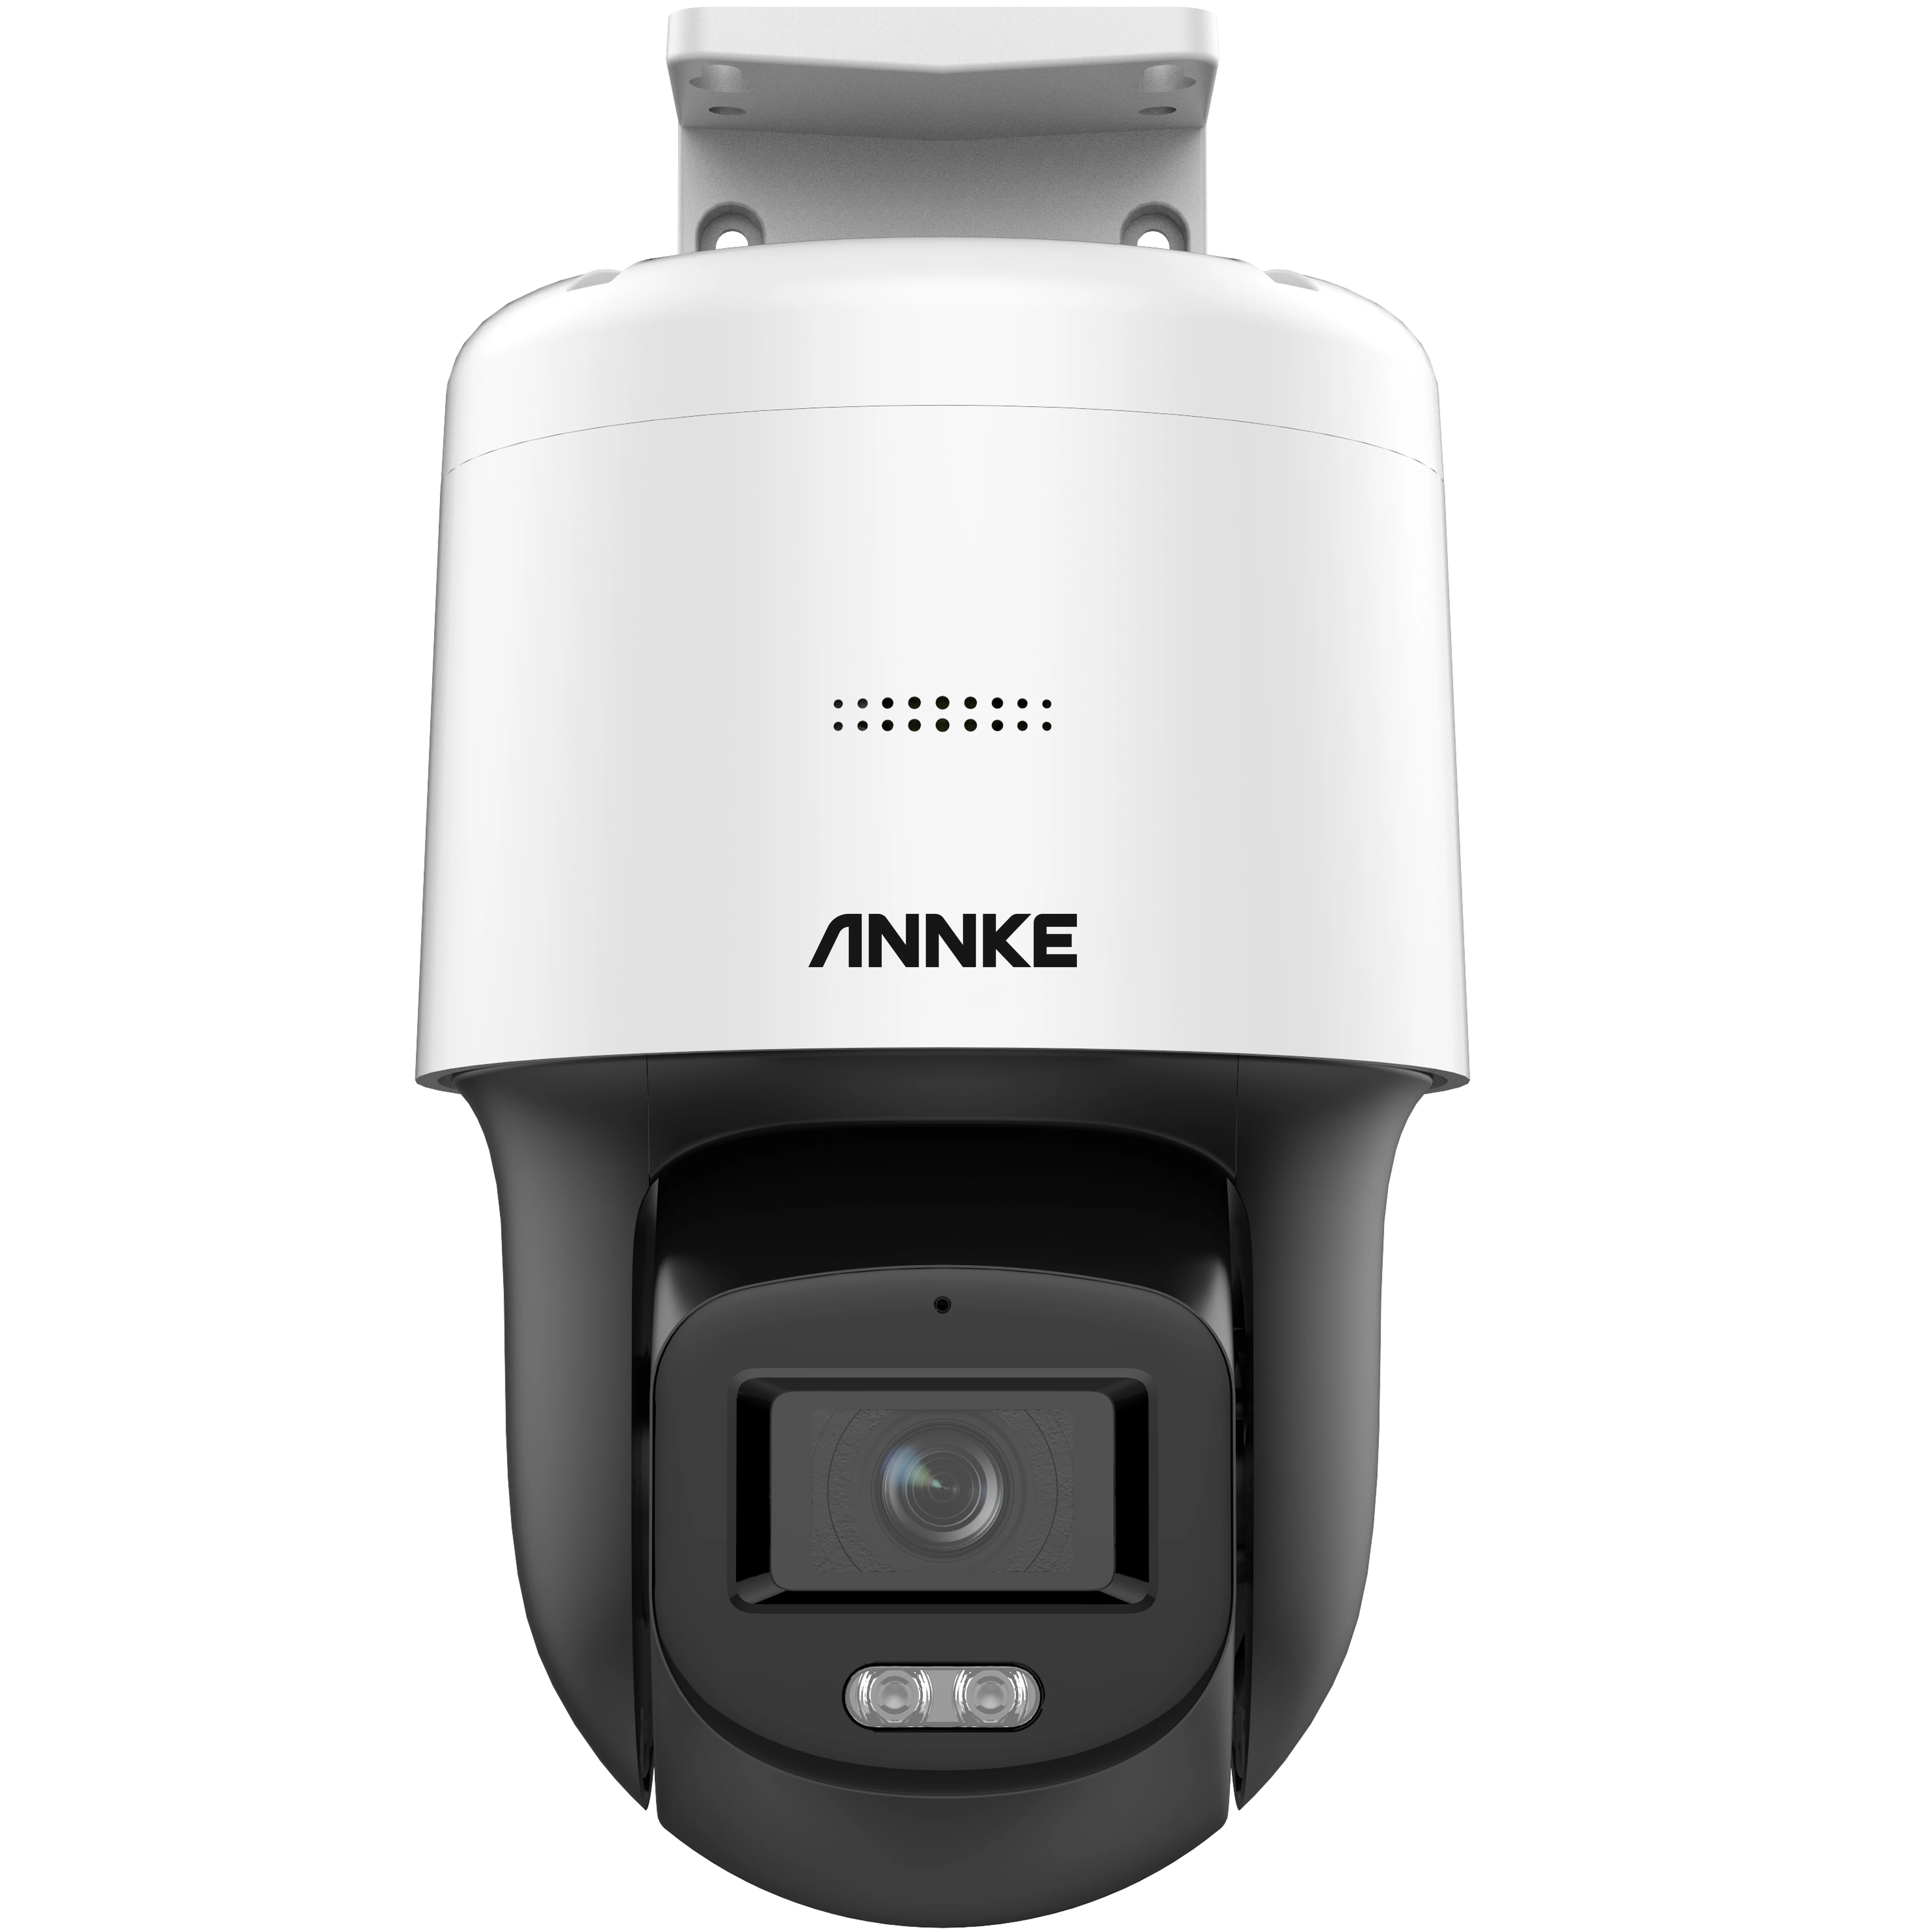 

ANNKE NightChroma 4MP POE IP Dome PT Security Camera with Two-way Audio IP67 Outdoor Waterproof CCTV Camera